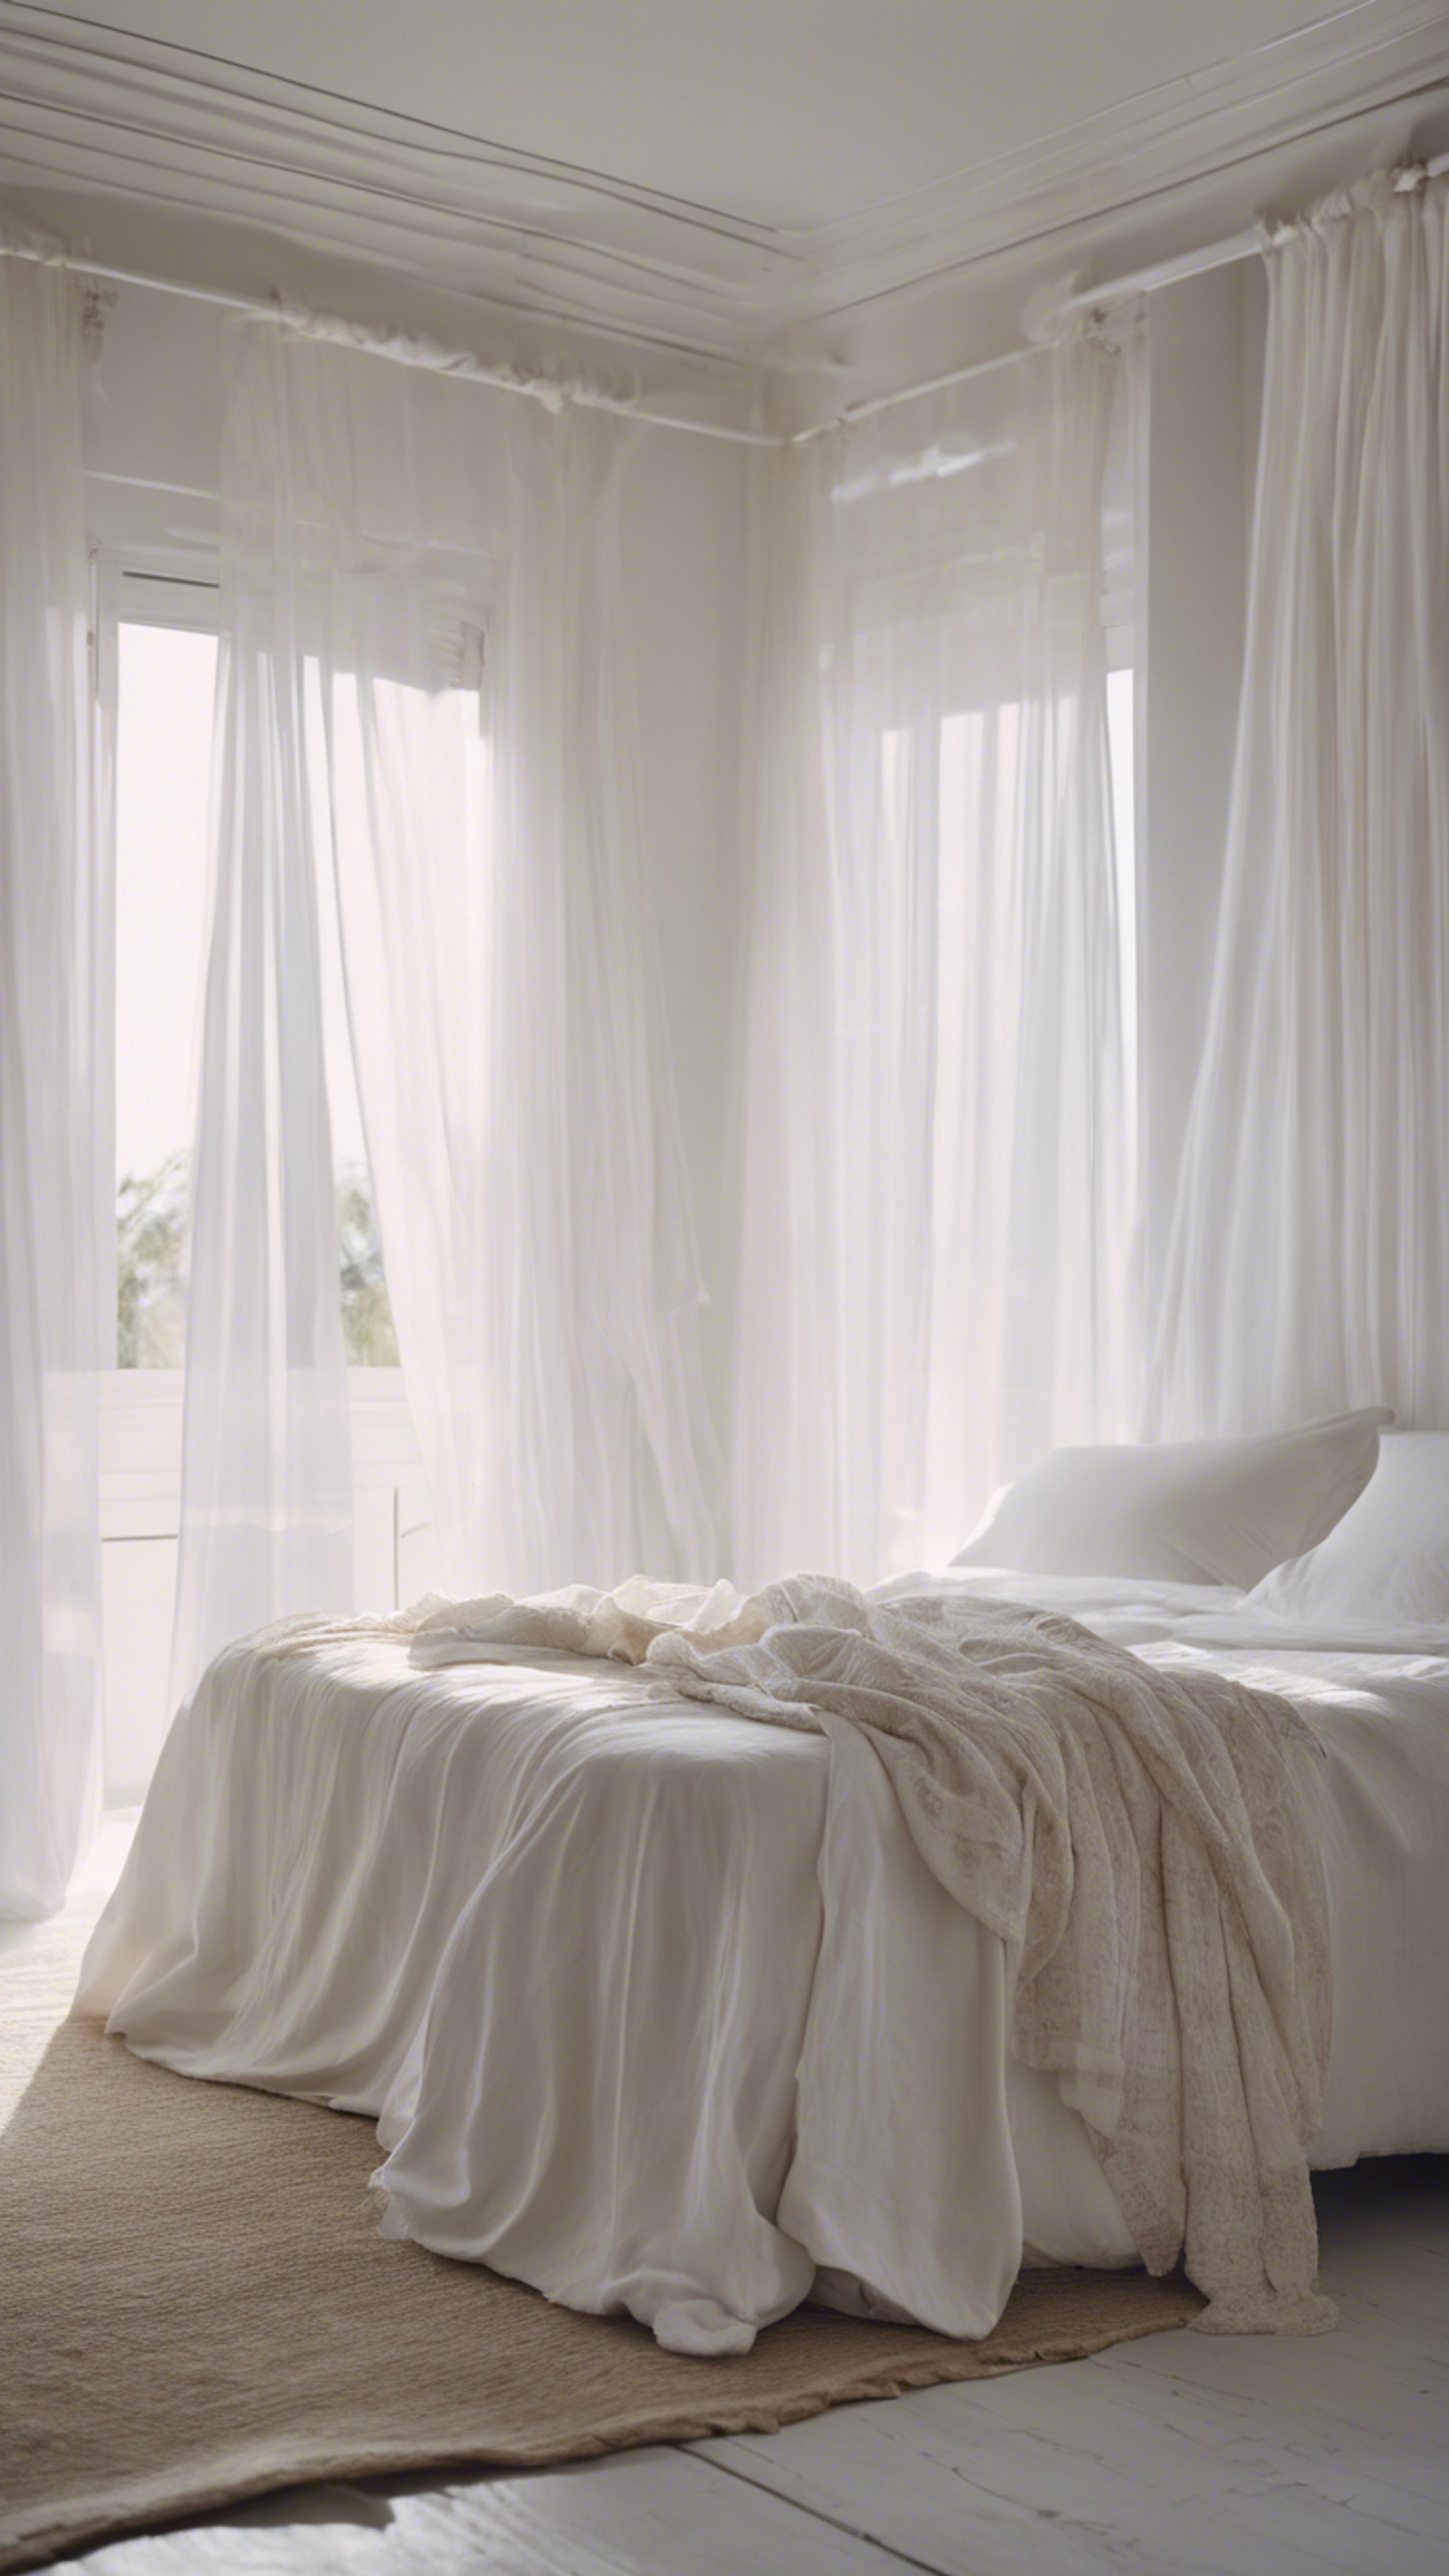 A dreamy white bedroom with sheer curtains blowing in the wind, white bed linens and an array of daylight from the window. Тапет[01f8a65ac1ab4b5d8d2d]